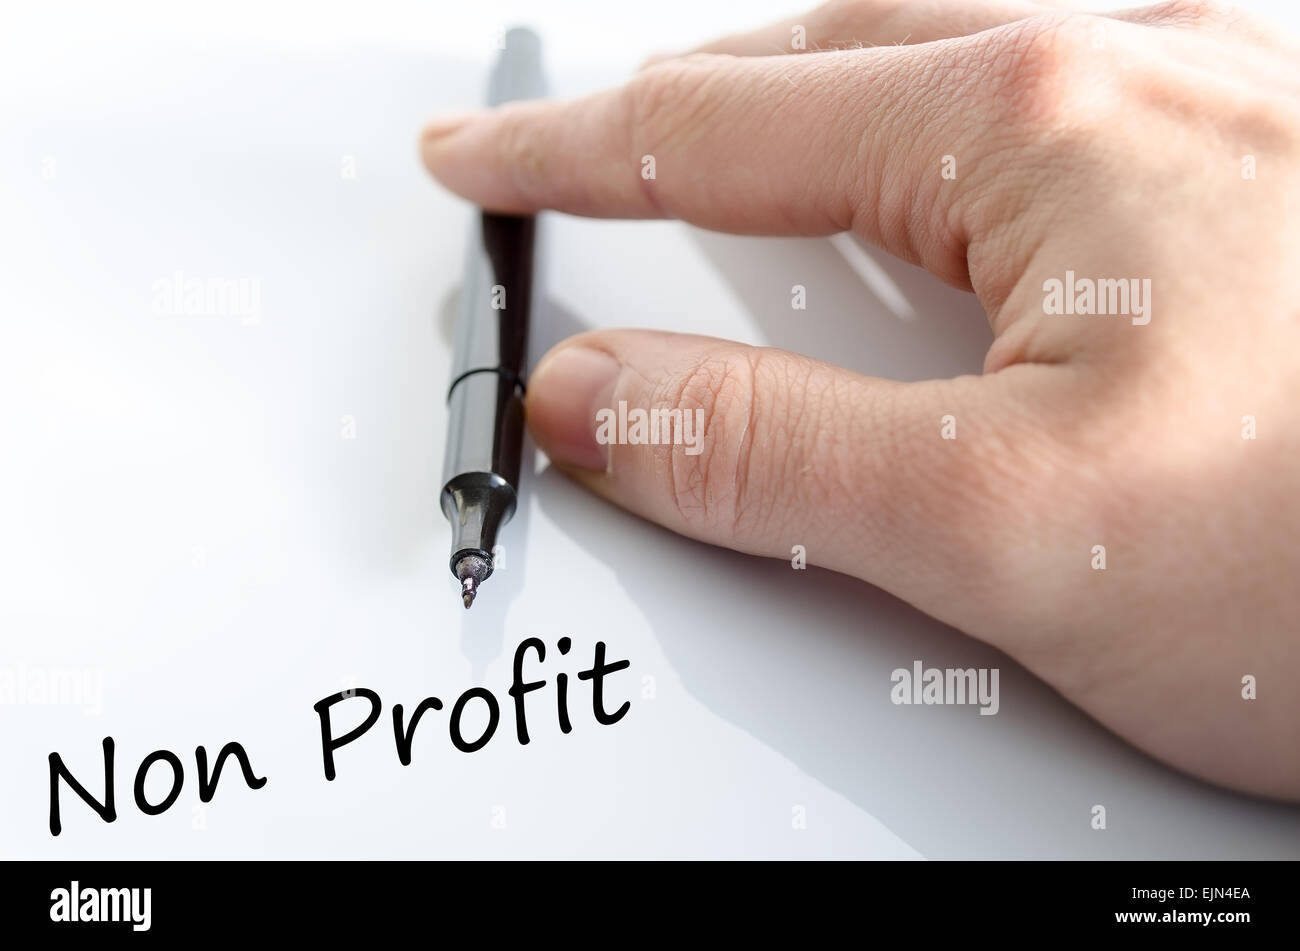 Human hand writing Non Profit  isolated over white background - business concept Stock Photo